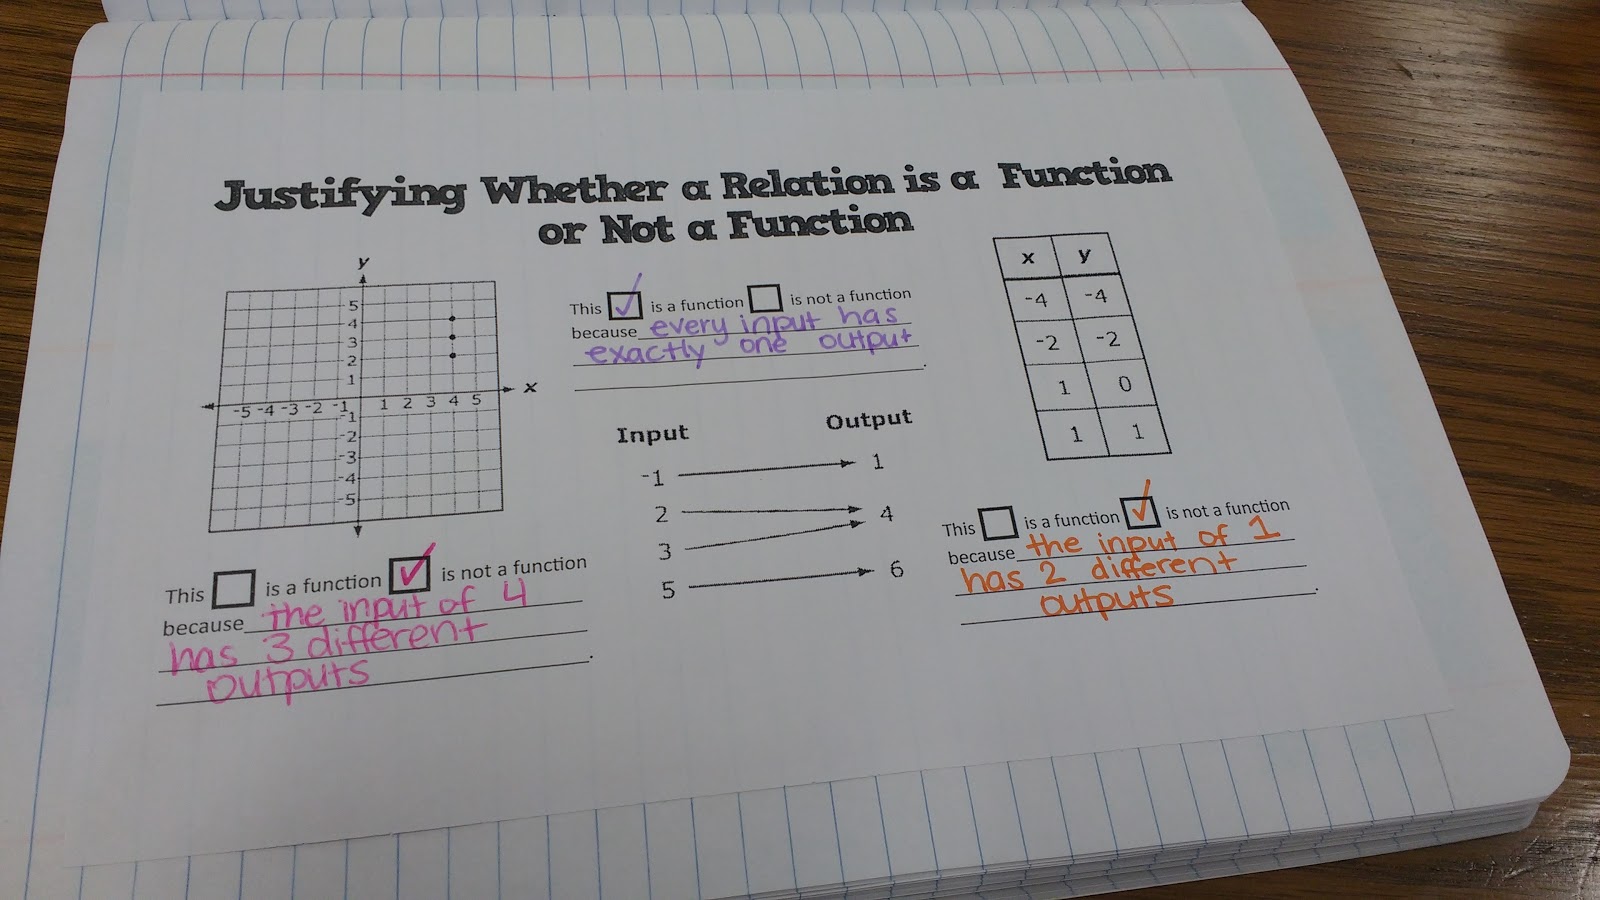 Notes in interactive notebook on justifying whether a relation is a function or is not a function